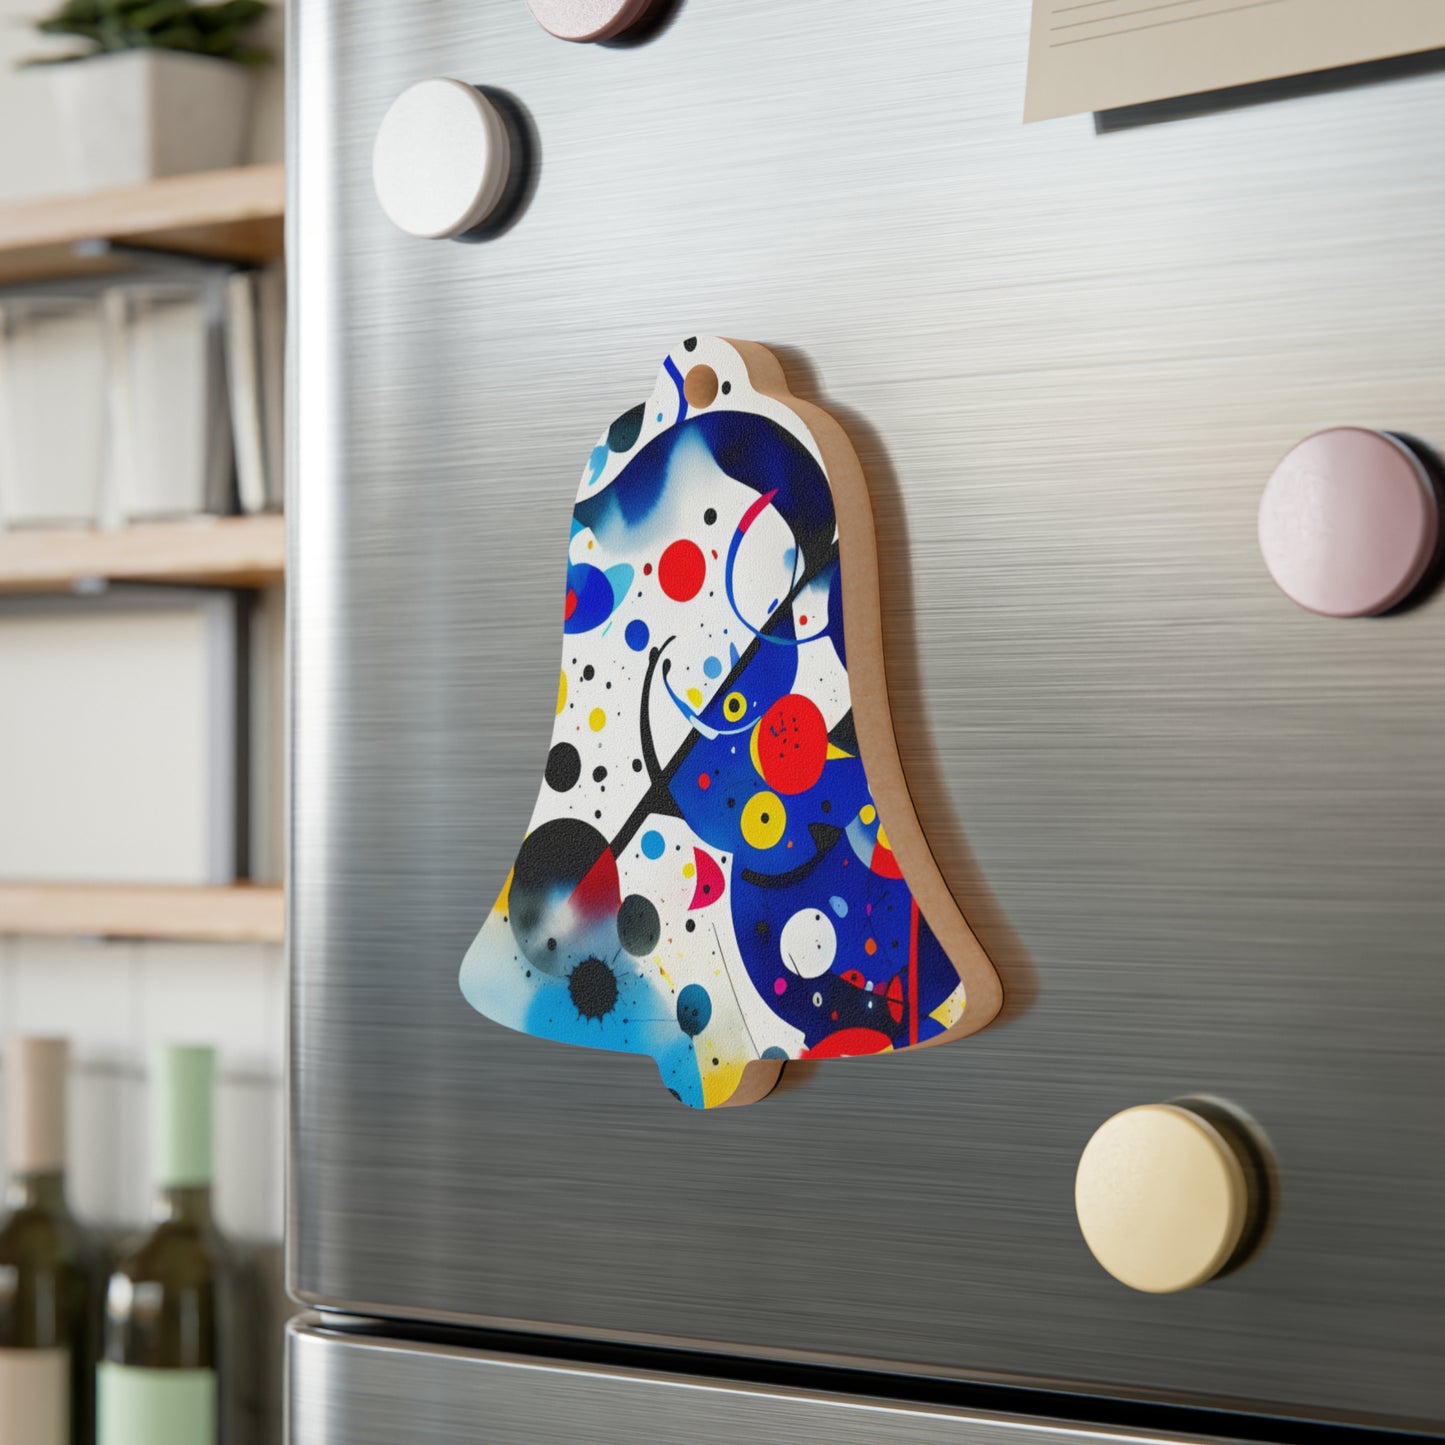 Wooden Ornaments, Inspired by Miro